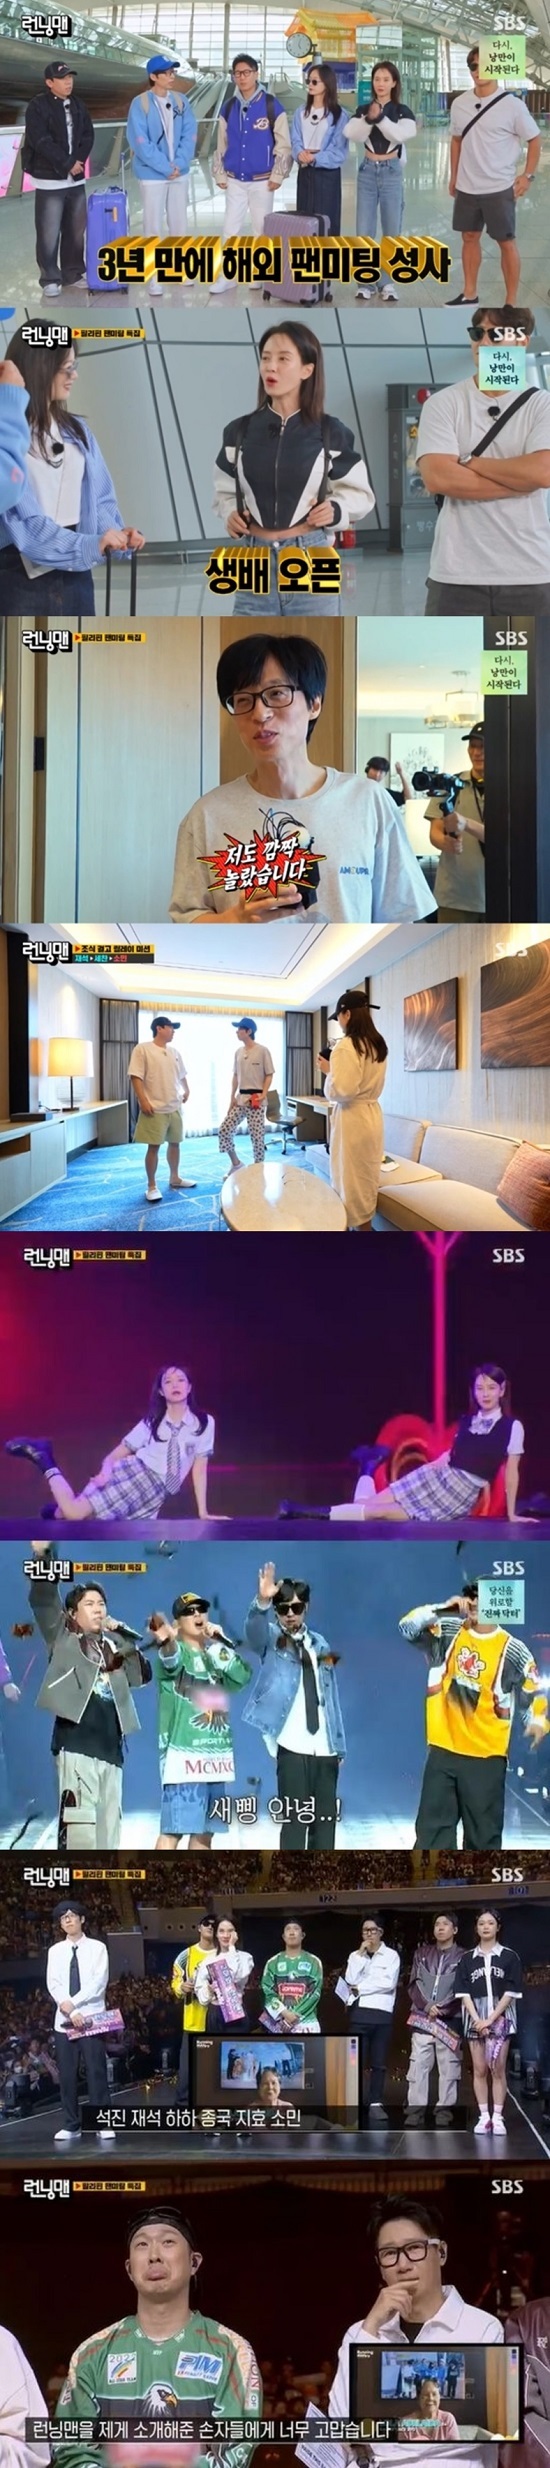 Running Man Yoo Jae-suk baffled by Song Ji-hyos airport fashionSBS  ⁇  Running Man  ⁇ , which was broadcast on the 16th, was the target TV viewer ratings  ⁇  2049 TV viewer ratings  ⁇  3.3% (Nielsen Korea metropolitan area, furniture standard), rising sharply from last week and ranked first in the same time zone.Top TV viewer ratings per minute also shot up to 6.8%.The broadcast was made up of an episode of  ⁇  Running Man in Philippines  ⁇ , a special feature of the Philippines fan meeting, as previously announced.Members were excited about the opening of the airport for a long time and were excited to go to the overseas fan meeting for three years.Among the members who showed fashionable airport fashion, Song Ji-hyo showed off his young fashion as a cheap fashion that exposes his life, but the members avoided his gaze and laughed.Song Ji-hyo said, My brother is embarrassed, so he doesnt look at me. When I introduced airport fashion, I skipped after my brother and went over to So-min.Yoo Jae-Suk admitted, Its a fashionable fashion, but I was embarrassed when I first saw Ji-hyos appearance.Afterwards, the members arrived at the Philippine Manila airport at dawn local time and proceeded to the full schedule.Even though it was early in the morning, Philippine fans gathered outside the Manila airport to see the members, and it was impossible to shoot.  ⁇  Running Man ⁇ s hot global popularity was proven.On the other hand, the fan meeting held on the day was so exciting that 10,000 seats were sold out in an hour, so the members repeatedly rehearsed and practiced in advance.As the start time of the performance approached, the concert hall was filled with the shouts of the fans, and the members set the stage for the opening with  ⁇ BTOB - I miss you  ⁇ .Yoo Jae-Suk showed off the redevelopment of love with the  ⁇   ⁇   ⁇   ⁇   ⁇ , and Kim Jong-kook gave a sweet stage with his hit song  ⁇   ⁇   ⁇ .In addition, Song Ji-hyo and Jeon Sang-min challenged  ⁇   ⁇   ⁇   ⁇  - LOVE DIVE  ⁇  and enthusiastically fancied their fans with their swords, and Yoo Jae-Suk X Kim Jong-kook X Haha X Yang Se-chan first unveiled the problematic Shunjiko-Contrary to the concern that it would be a show, members did their best and finished the stage without a big mistake.At the end of the fan meeting, the video was released along with the  ⁇   ⁇   ⁇   ⁇   ⁇   ⁇   ⁇  prepared by the Philippine fans, and the members burst into tears.The members were very grateful and bowed their heads, and Ji Seok-jin added, Running Man is my life. This scene was the best one minute with 6.8% of the best TV viewer ratings per minute.Yoo Jae-Suk expressed his gratitude that it was like a dream to have such an overseas fan meeting.In addition,  ⁇ Running Man ⁇ , which airs next week,  ⁇ Philippines boxing hero ⁇  Manny Pacquiao makes a surprise appearance and meets members once again, especially as he plans to unveil his house for the first time.Running Man is broadcast every Sunday at 6:20 pm.Photo=SBS